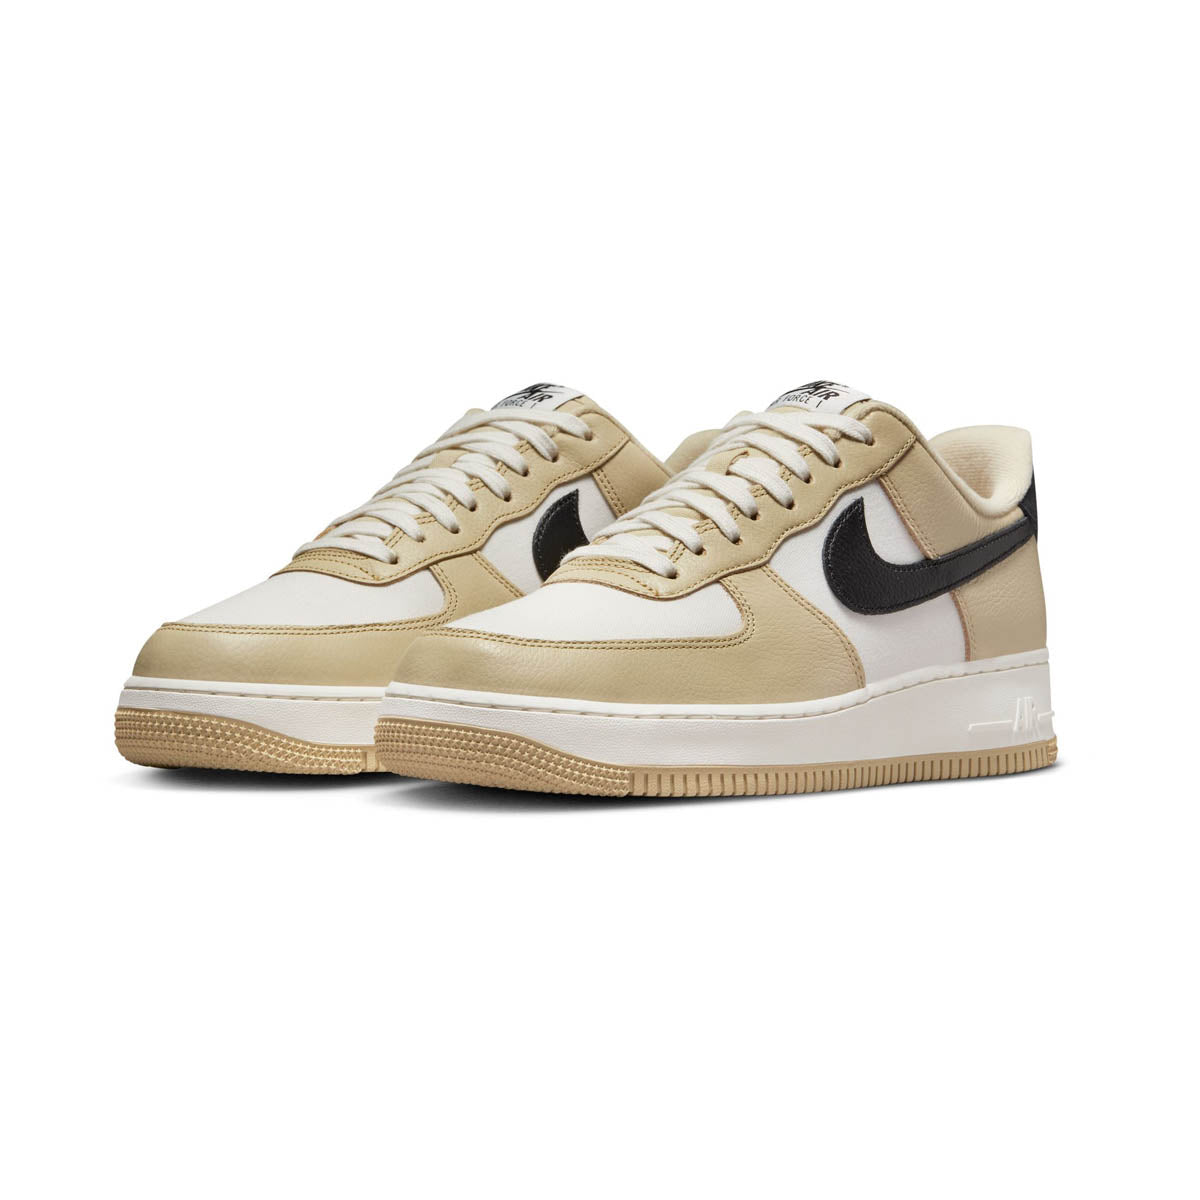 Nike Air Force 1 '07 LX Men's Shoes.